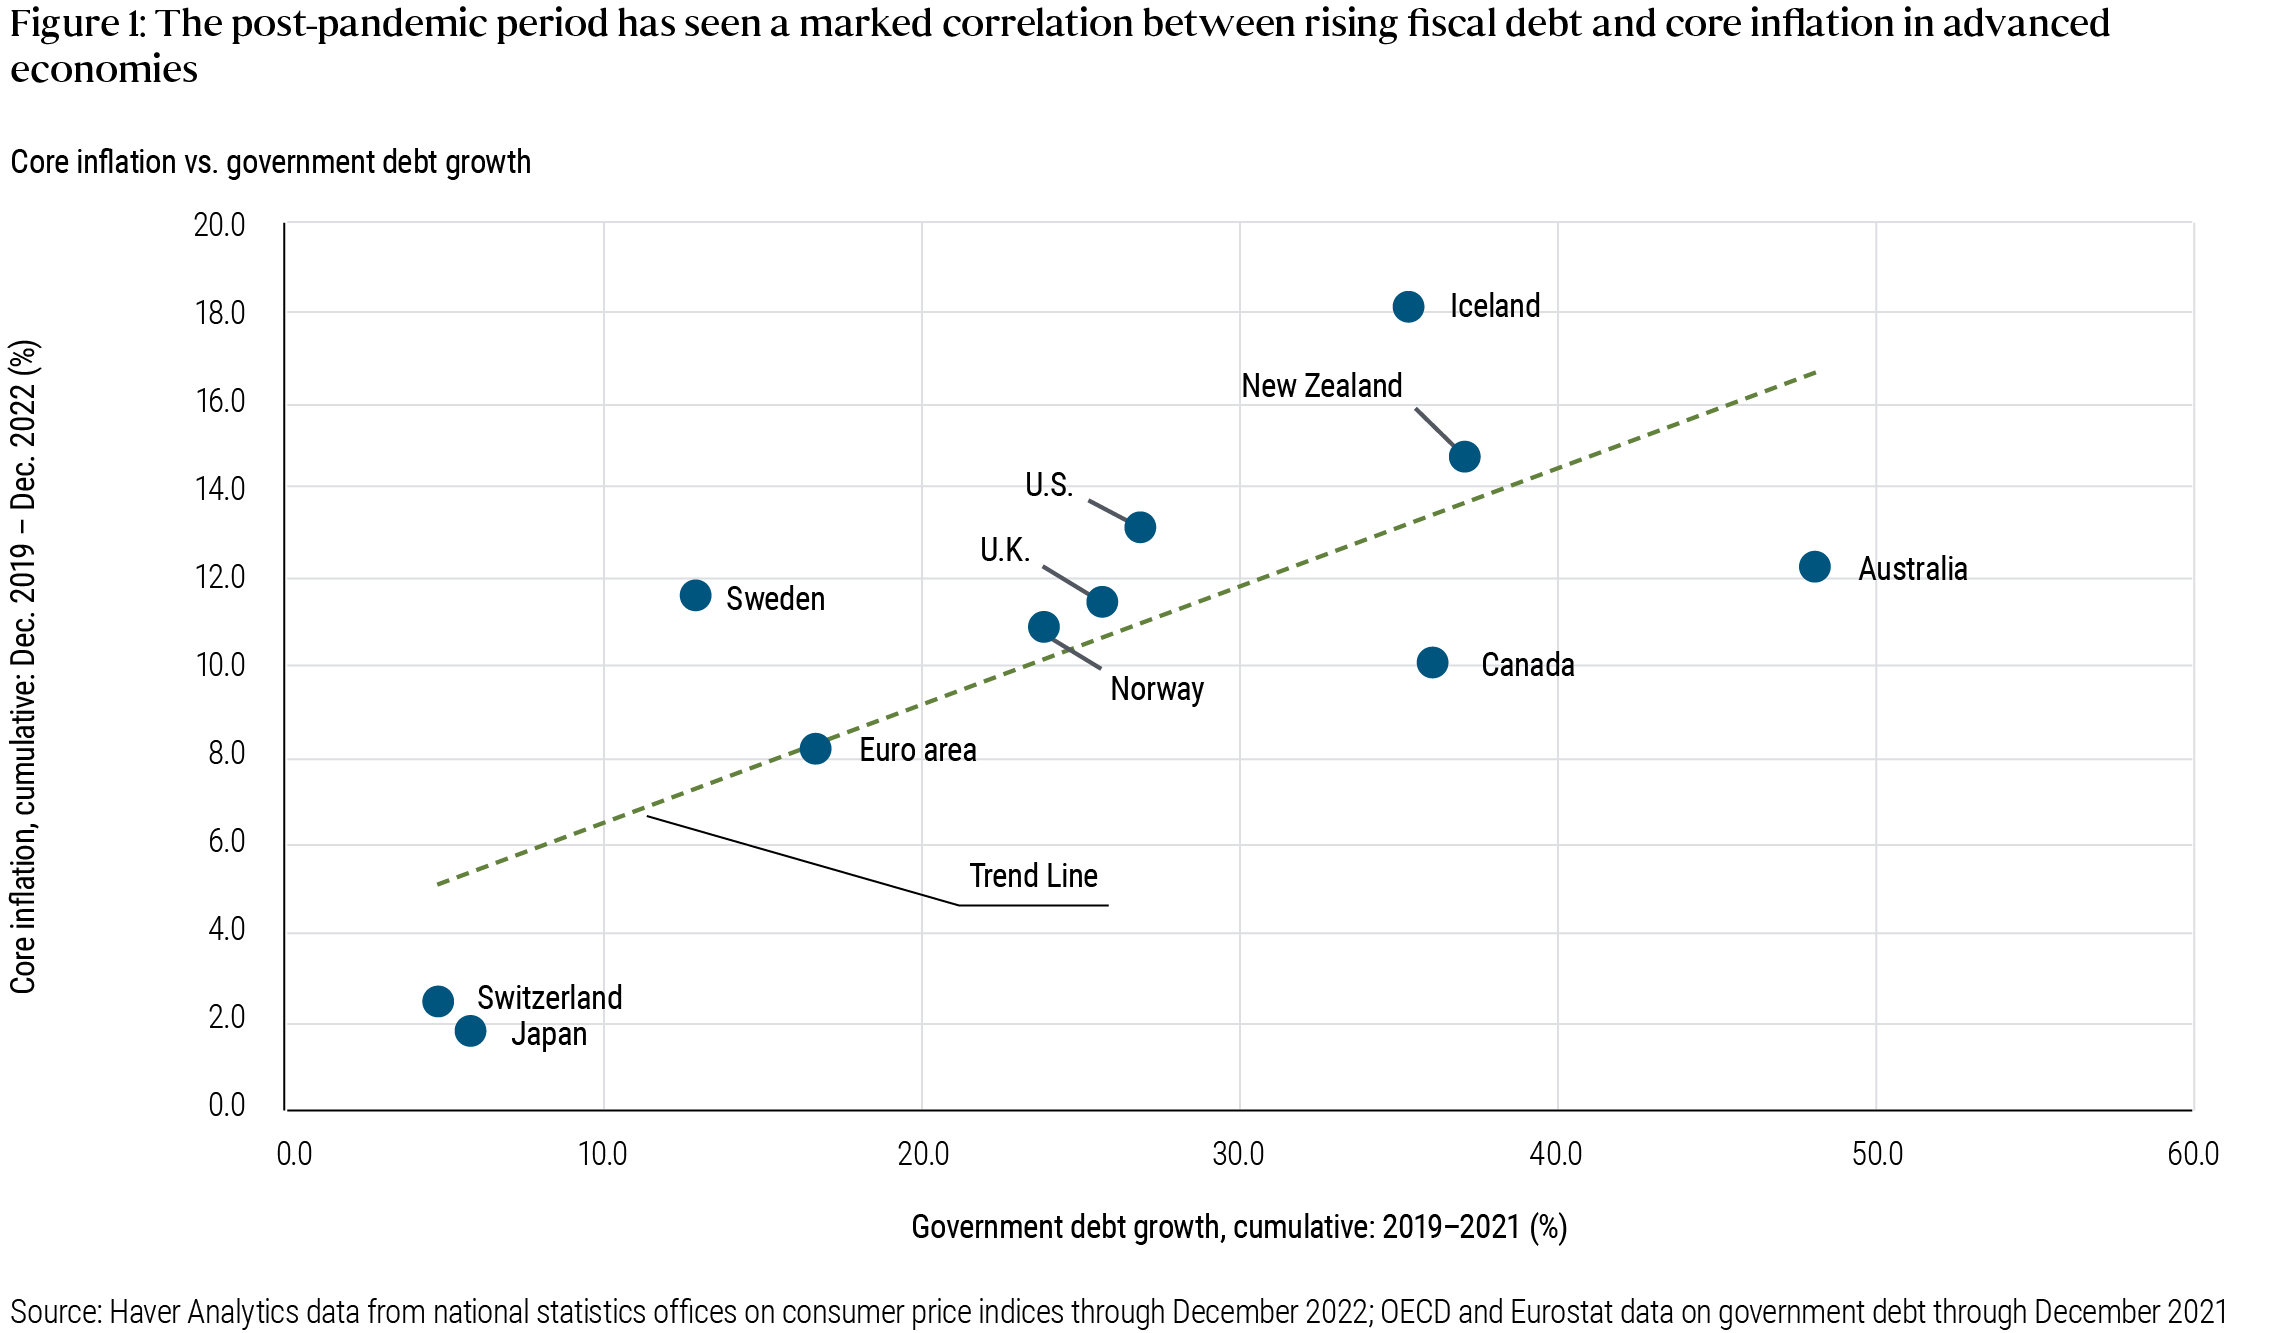 Figure 1 is a scatter chart plotting the correlation between core inflation and government debt growth in advanced economies in the post-pandemic era. As described in the preceding paragraph, many countries show a distinct correlation of rising government debt and increasing inflation. The U.S., for example, saw cumulative core CPI (consumer price index) inflation from Dec. 2019 – Dec. 2022 of above 13% and cumulative debt growth of more than 25% between 2019 and 2021. Japan, correspondingly, saw core CPI inflation of less than 2% and debt growth of around 5% over the same time frame. Data sources are Haver Analytics data from national statistics offices on consumer price indices through December 2022, and OECD and Eurostat data on government debt through December 2021.